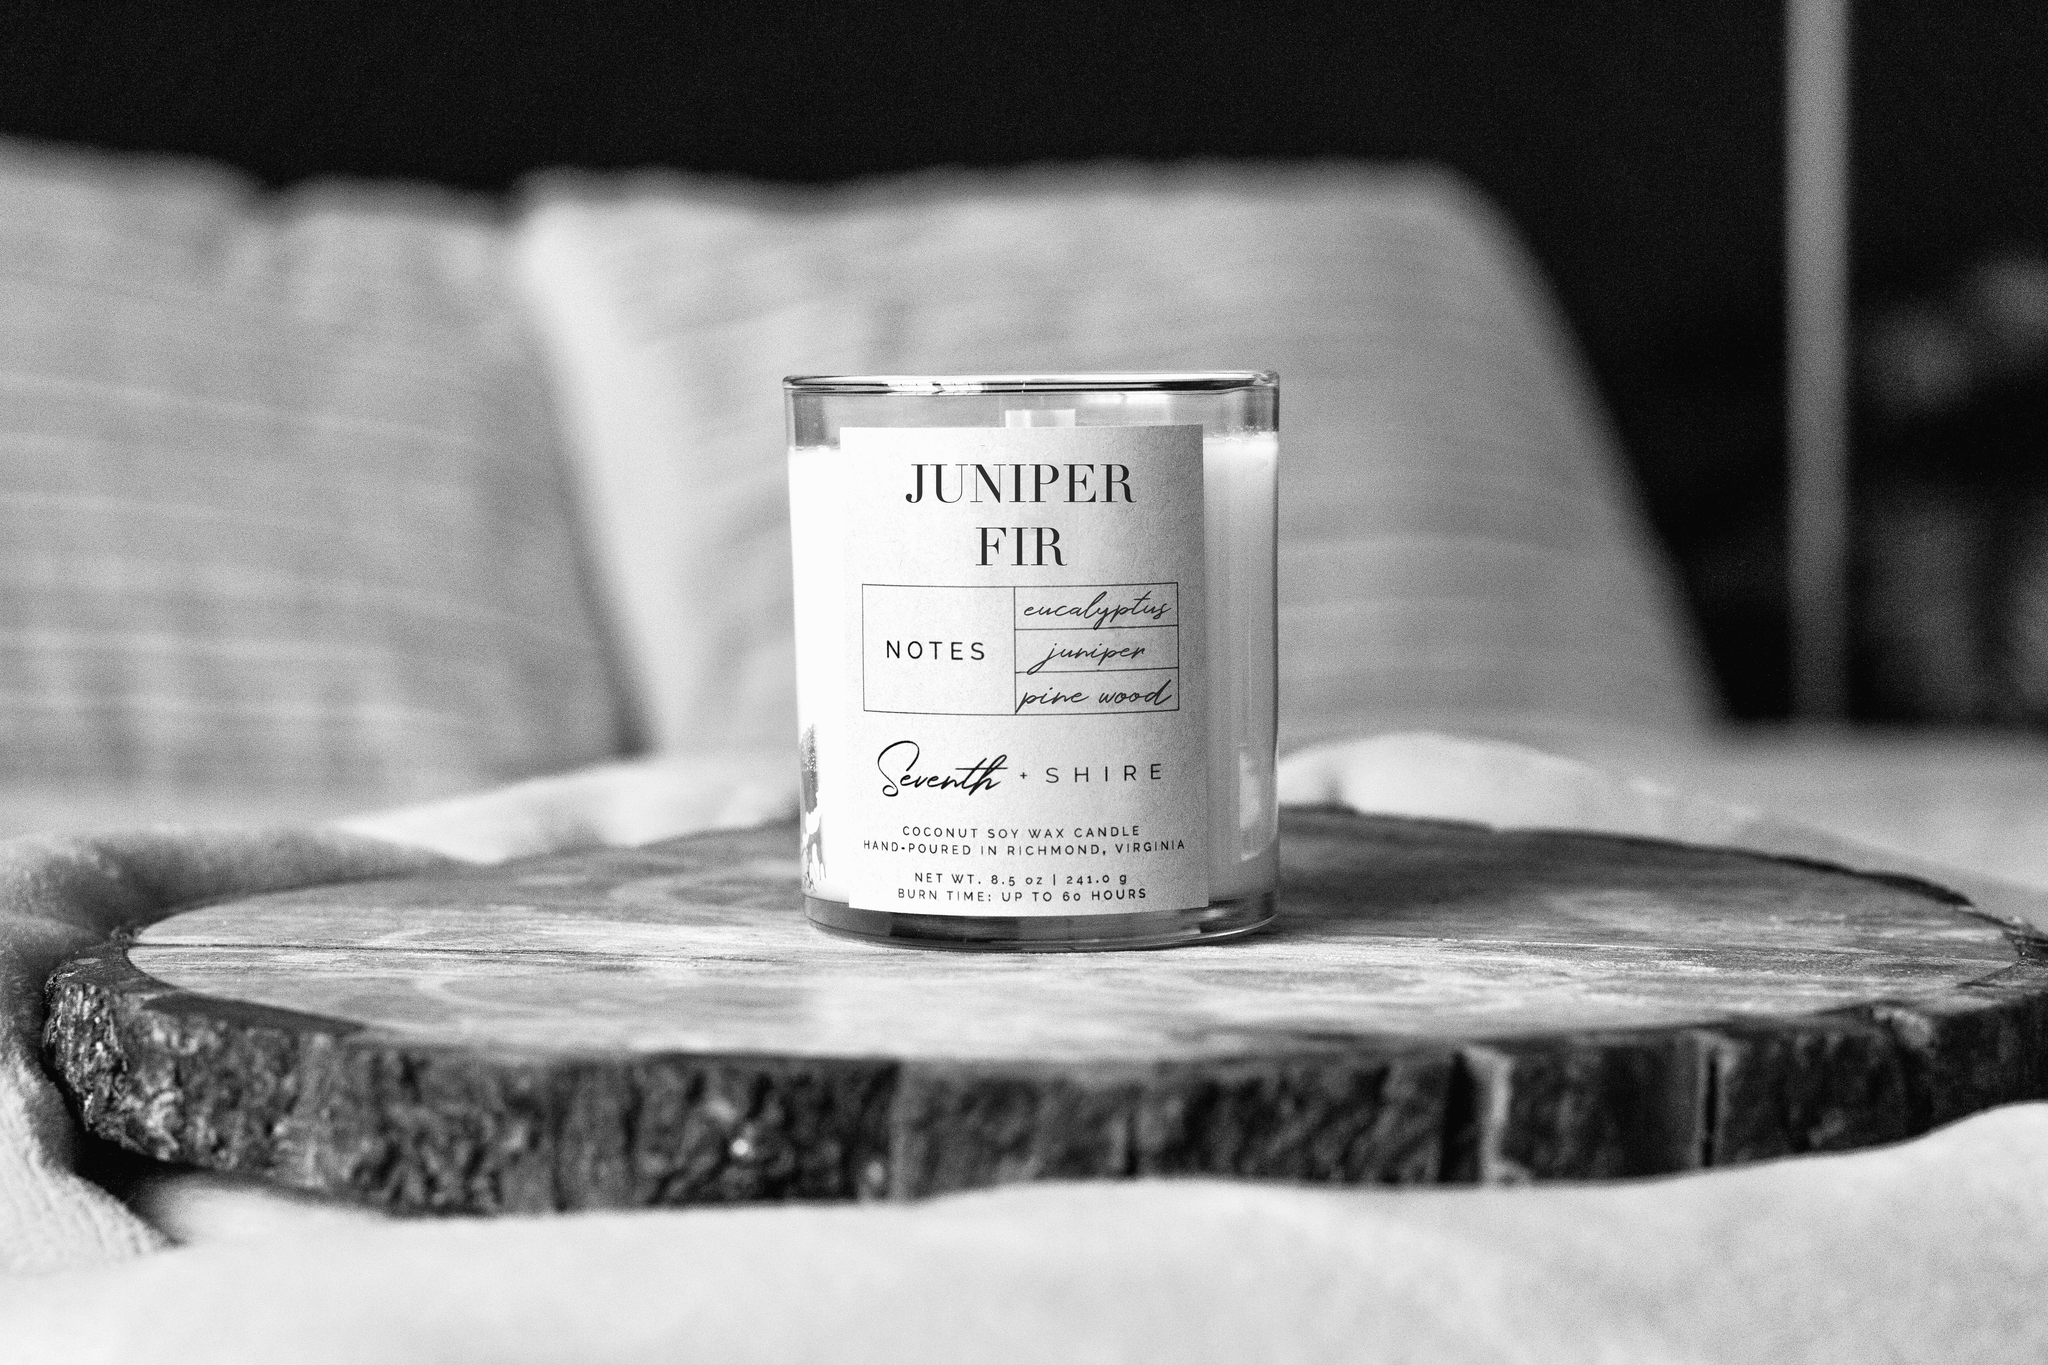 Juniper Fir home fragrance candle in glass tumbler jar on bed.